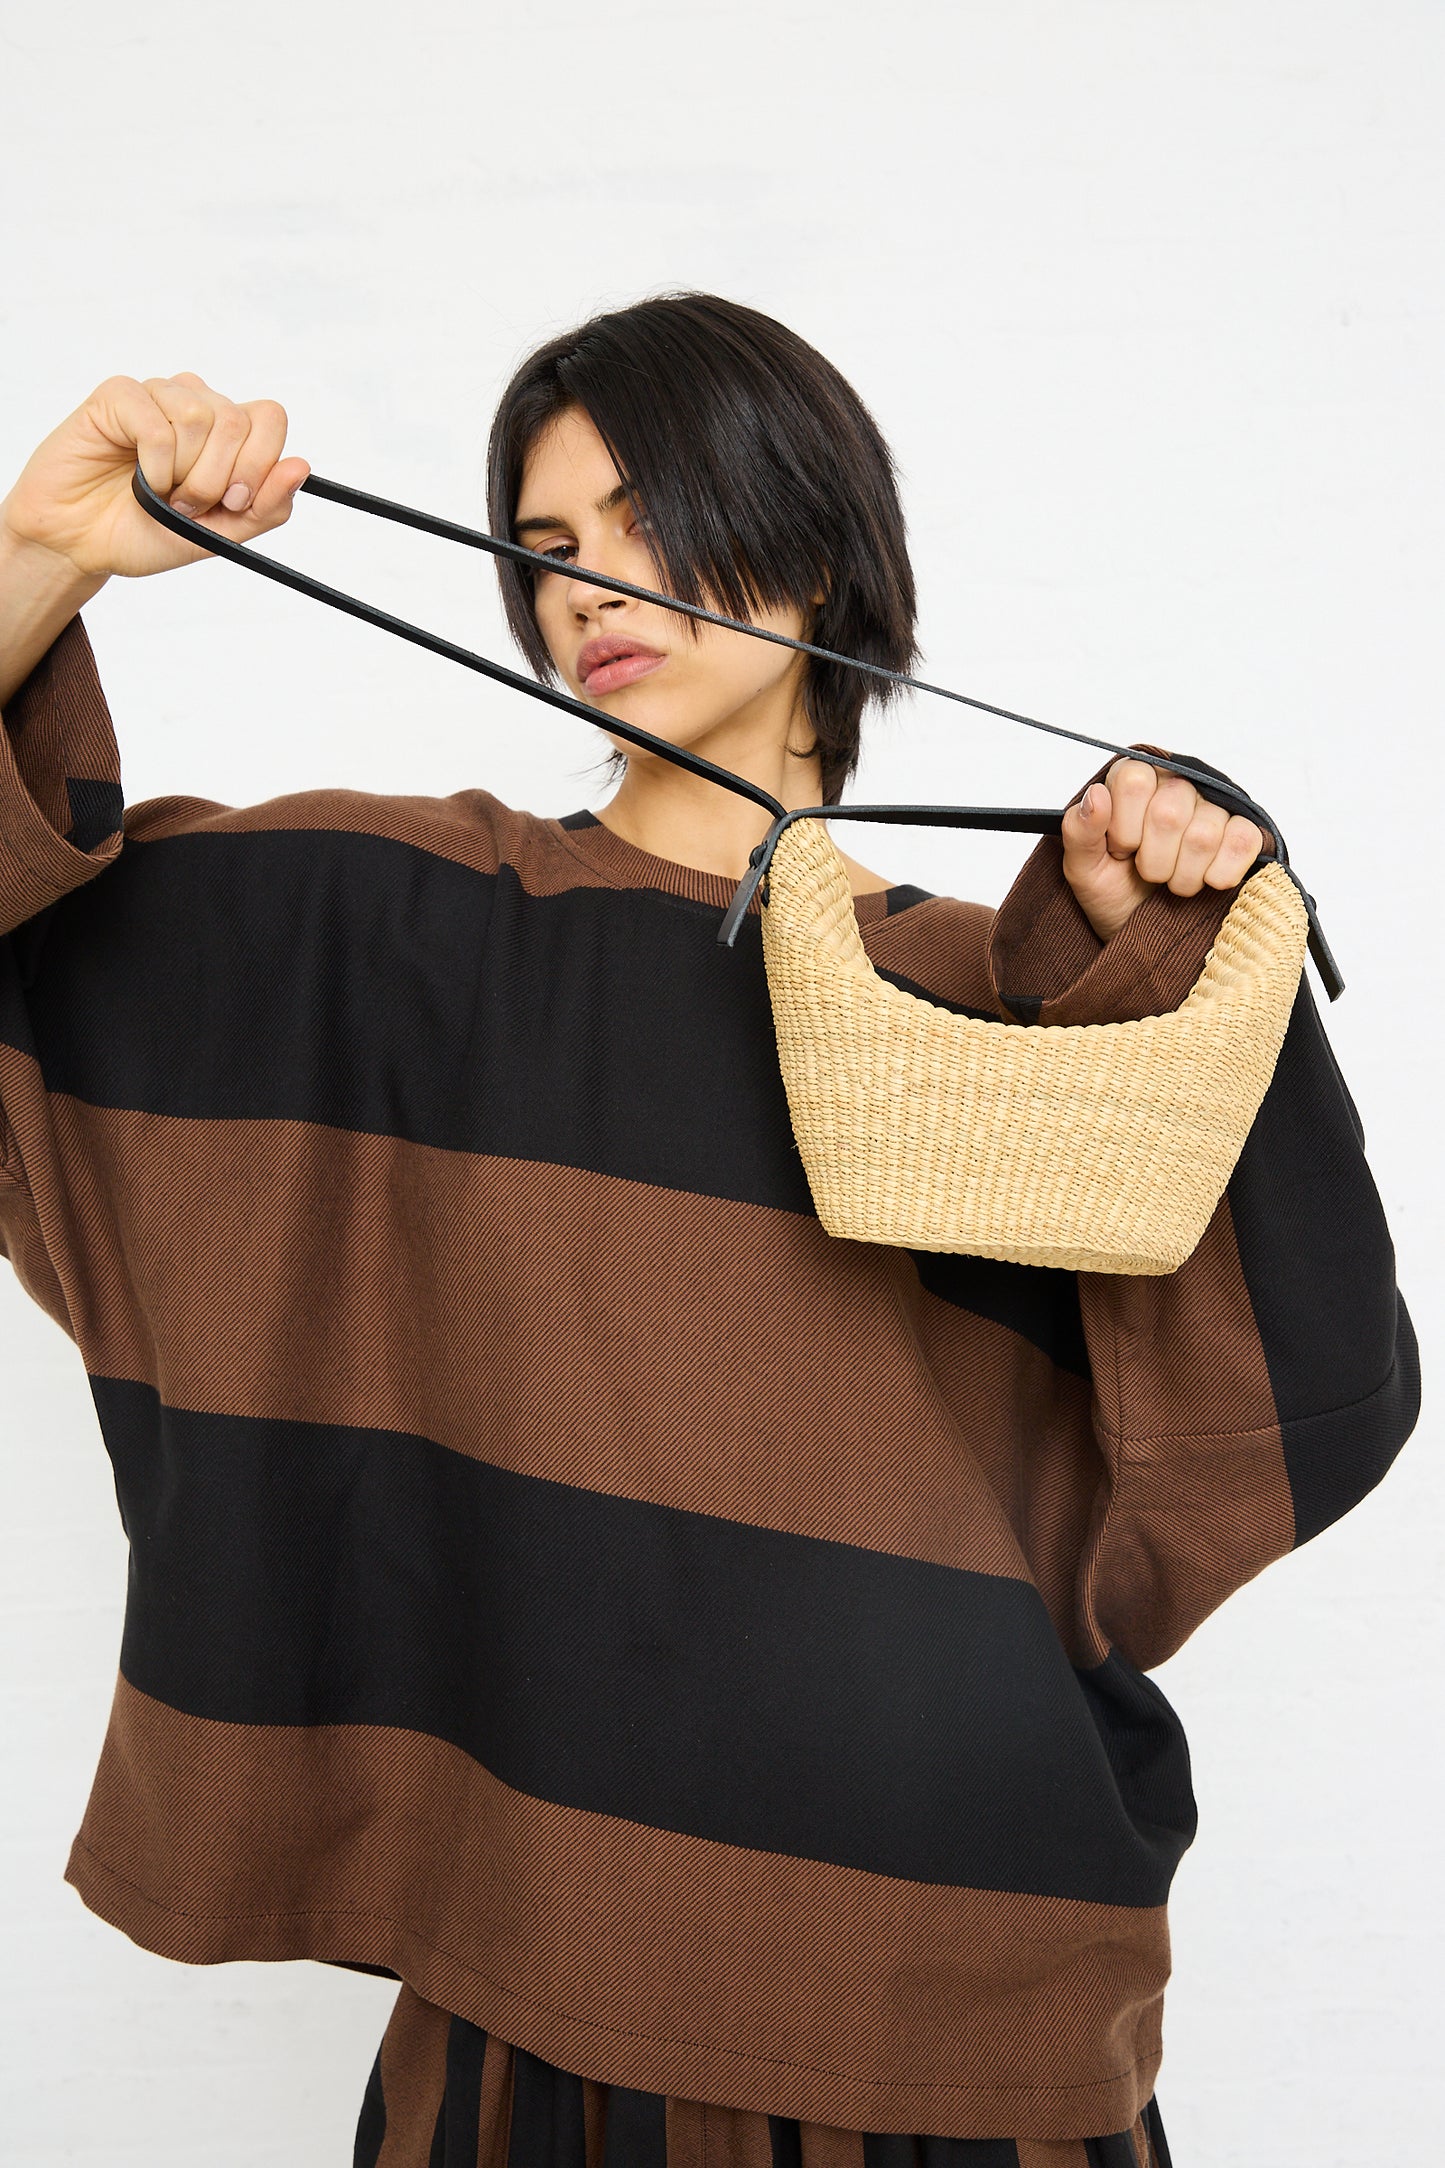 A woman pulling at the strap of a "N. 35 Mini Croissant Bag in Natural" handwoven bag slung over her shoulder by Inès Bressand.